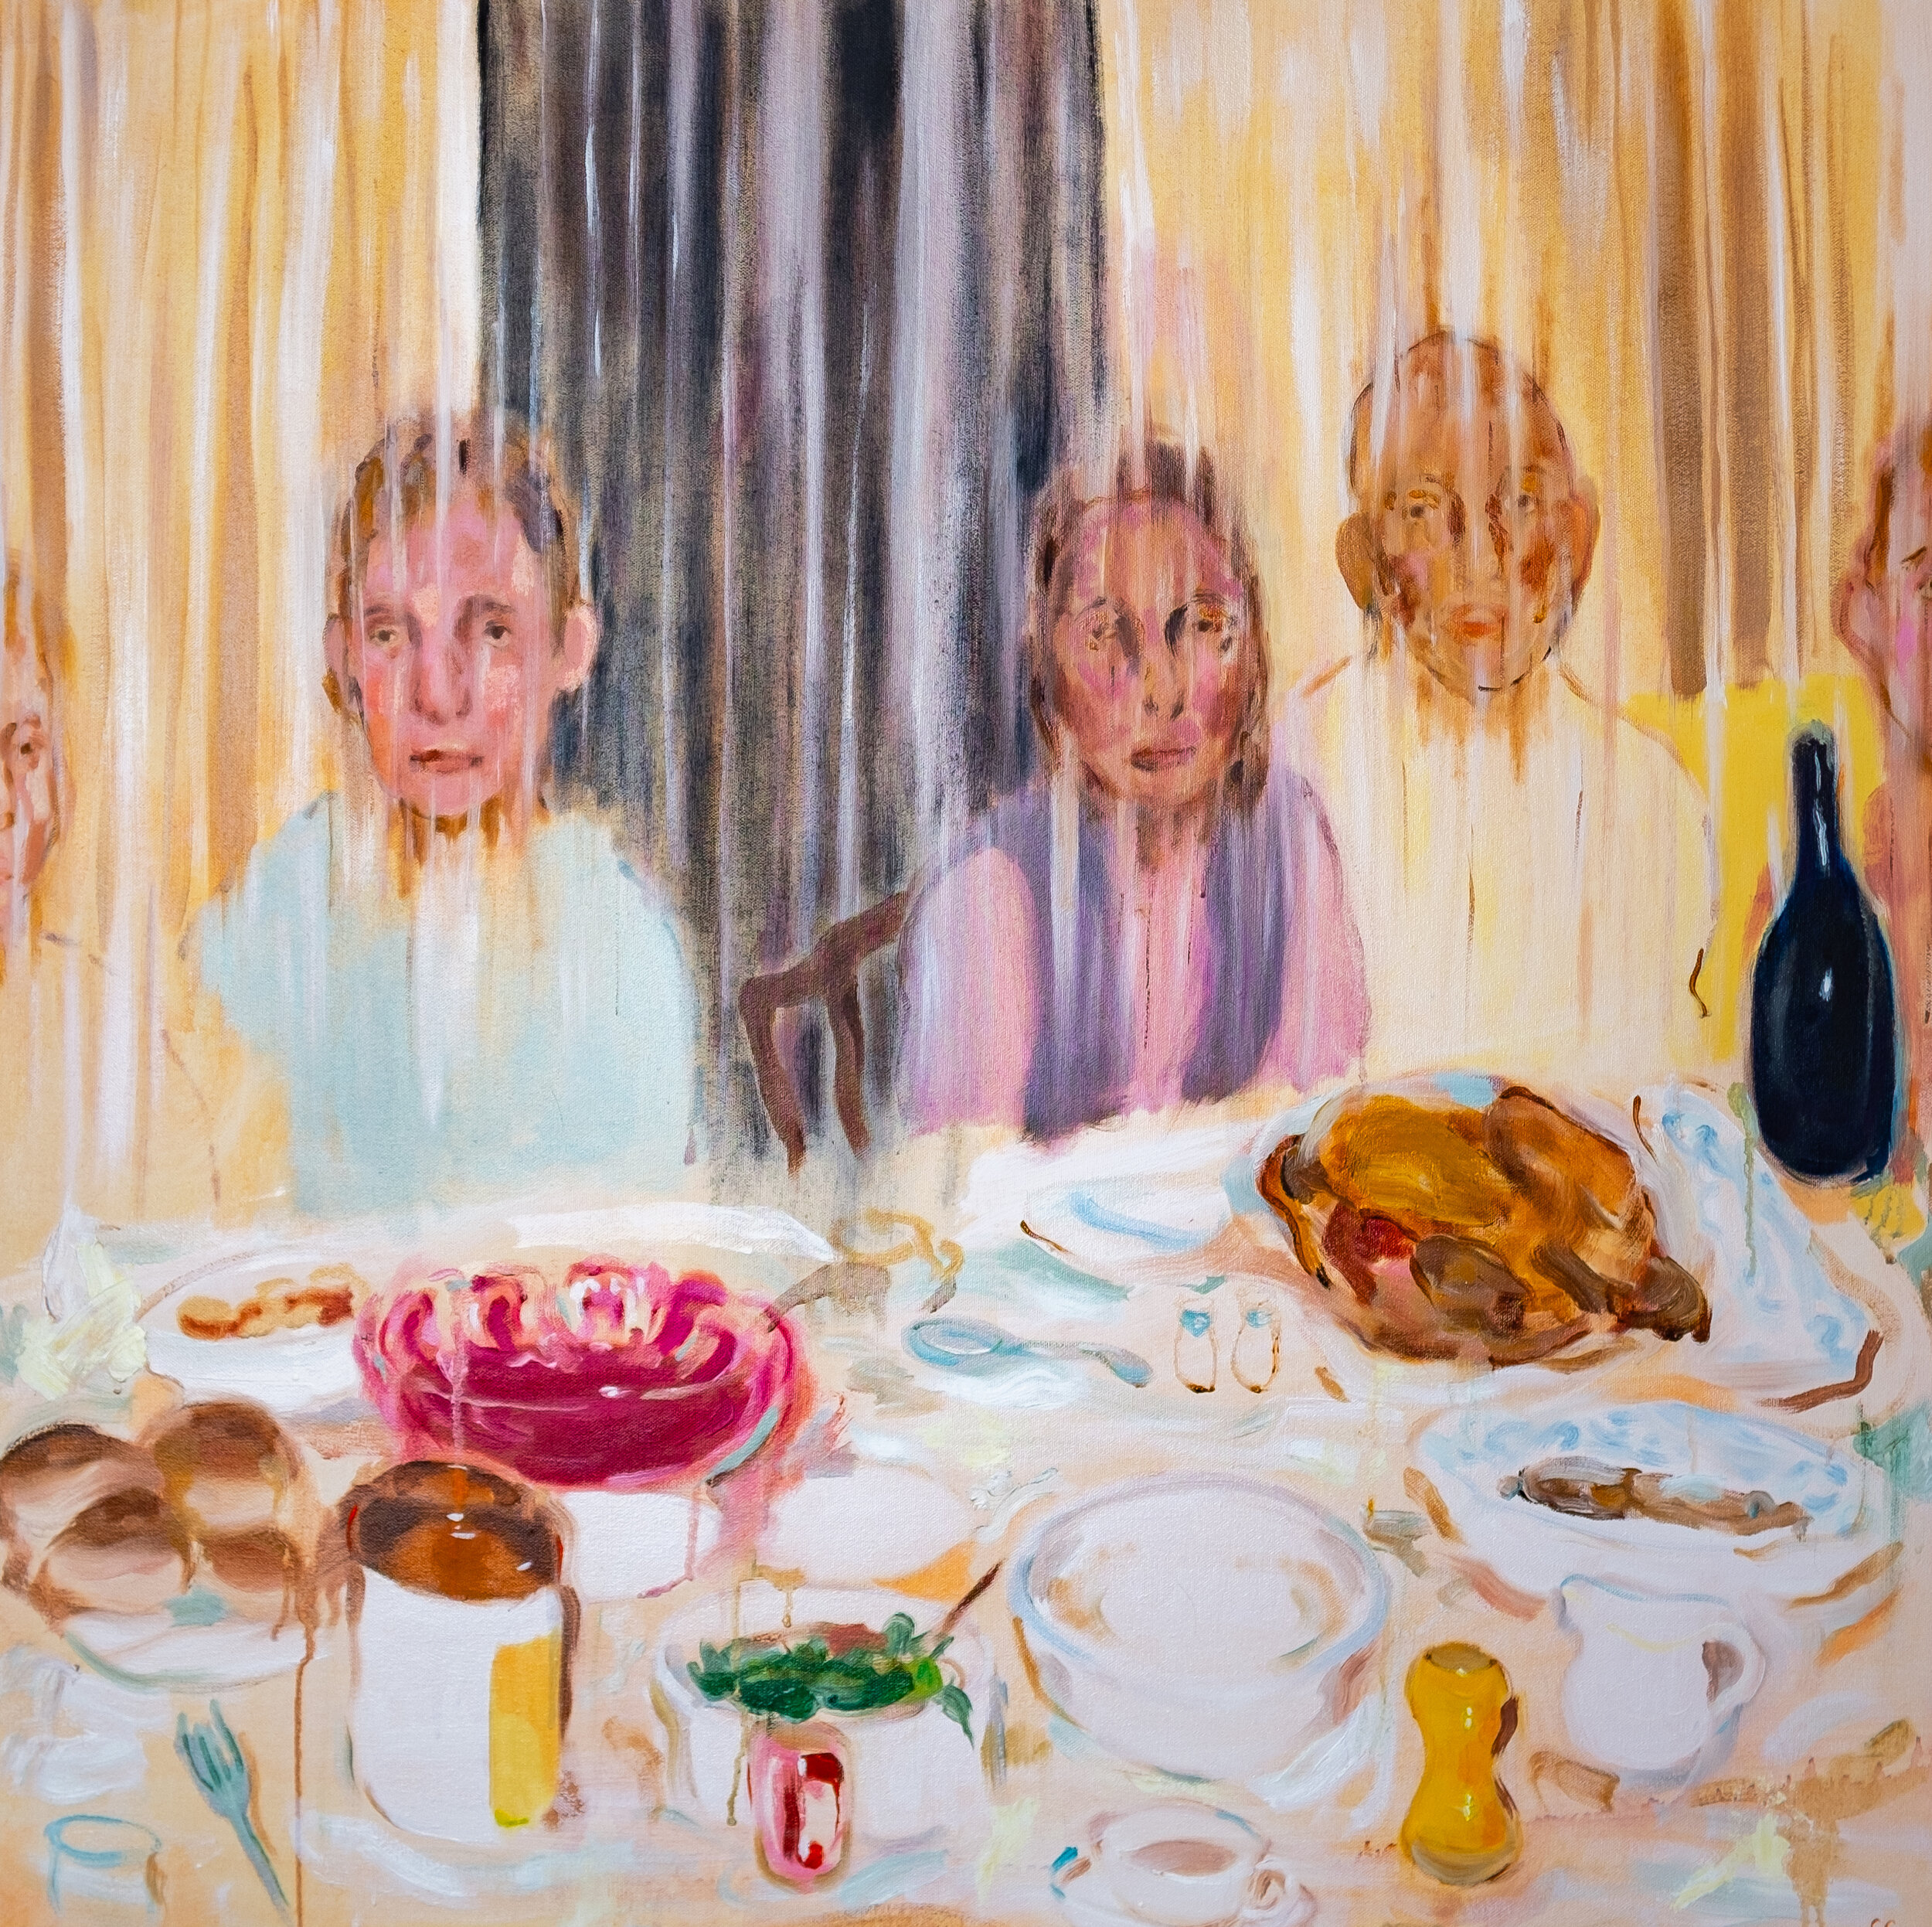  Cathleen Clarke,  The Dinner Party, Part II , 2021. Oil and acrylic on canvas, 36 x 36 inches. ©Cathleen Clarke, courtesy of Fou Gallery 